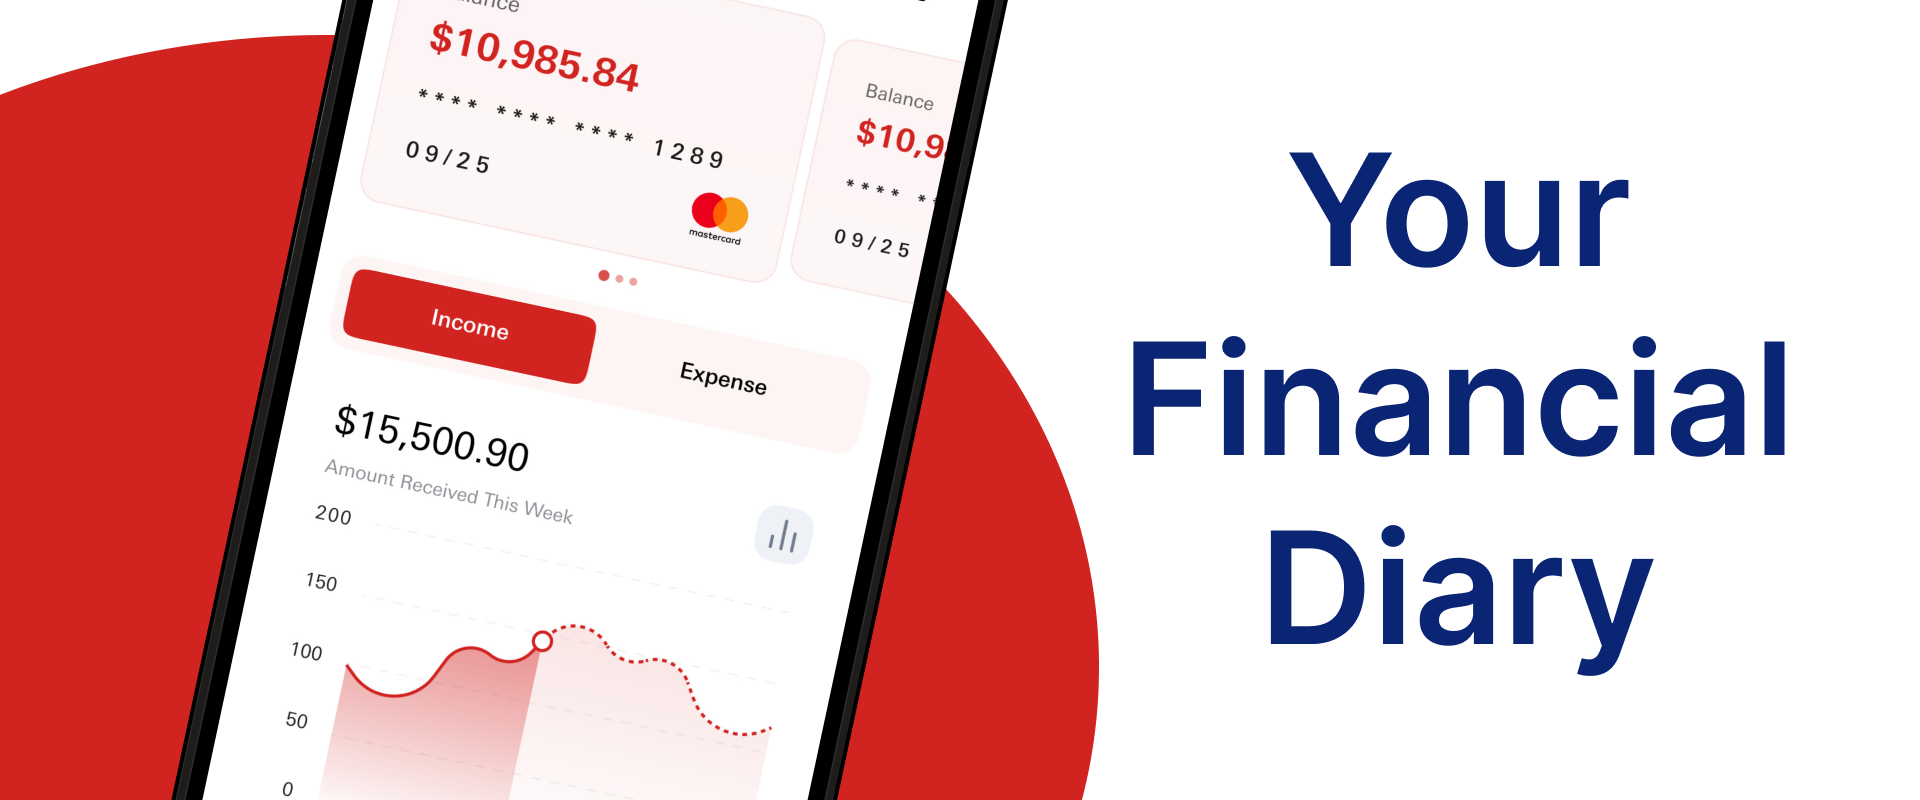 Your Financial Diary